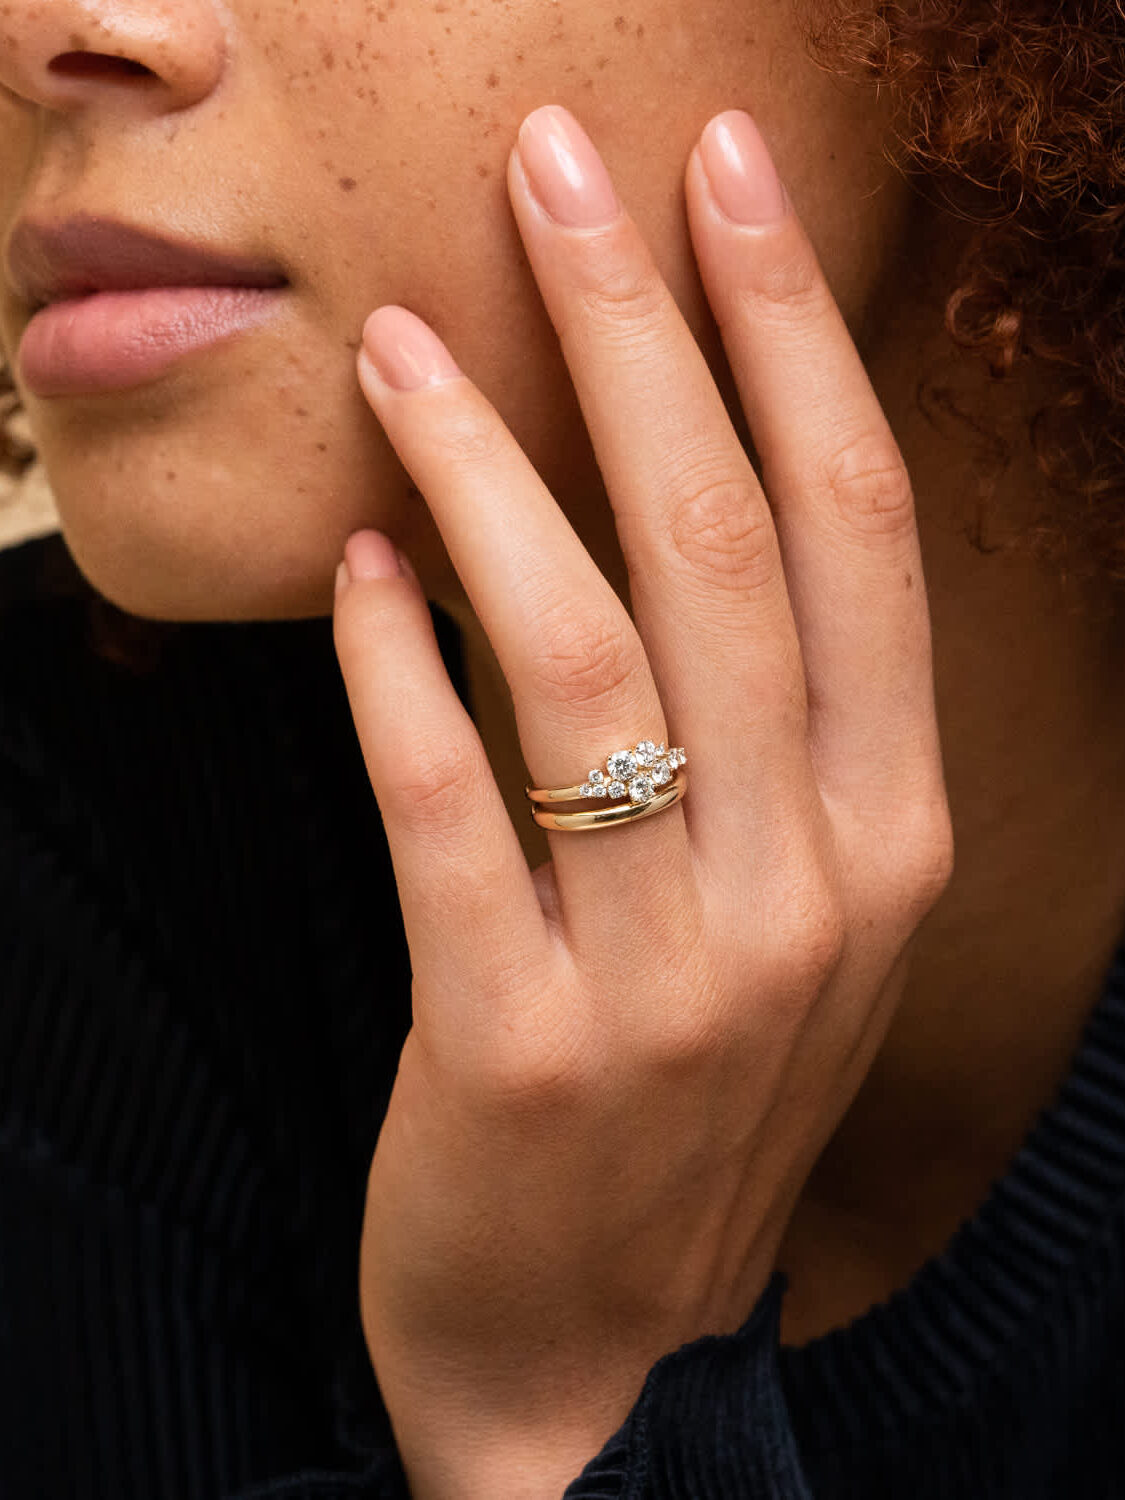 ethical engagement rings